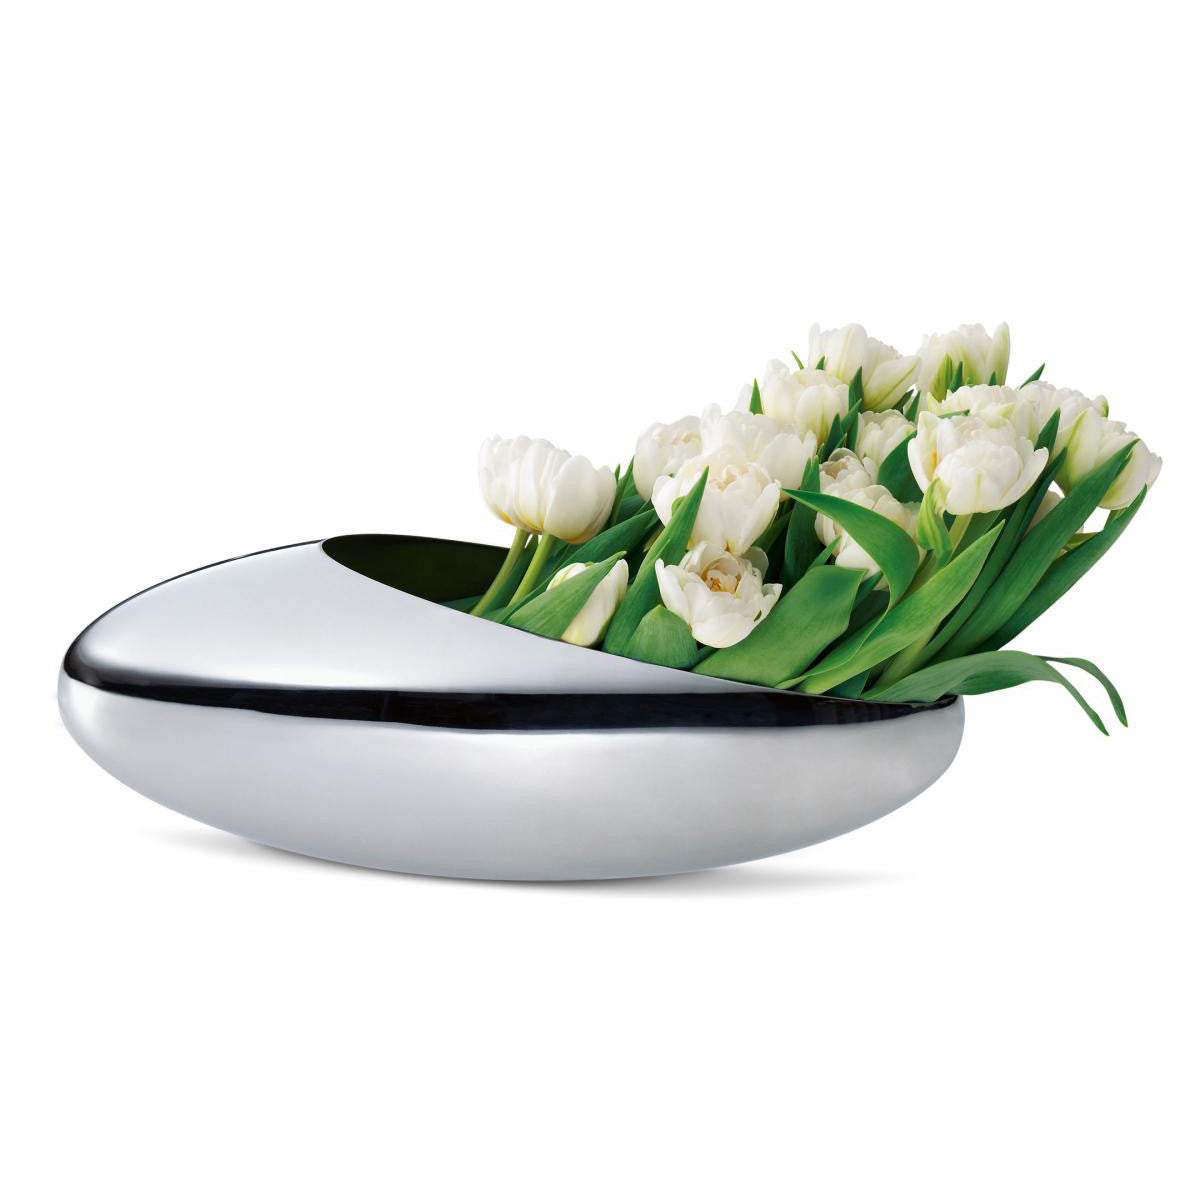 COCOON Champagne Cooler / Tulip Flower Vase by Philippi